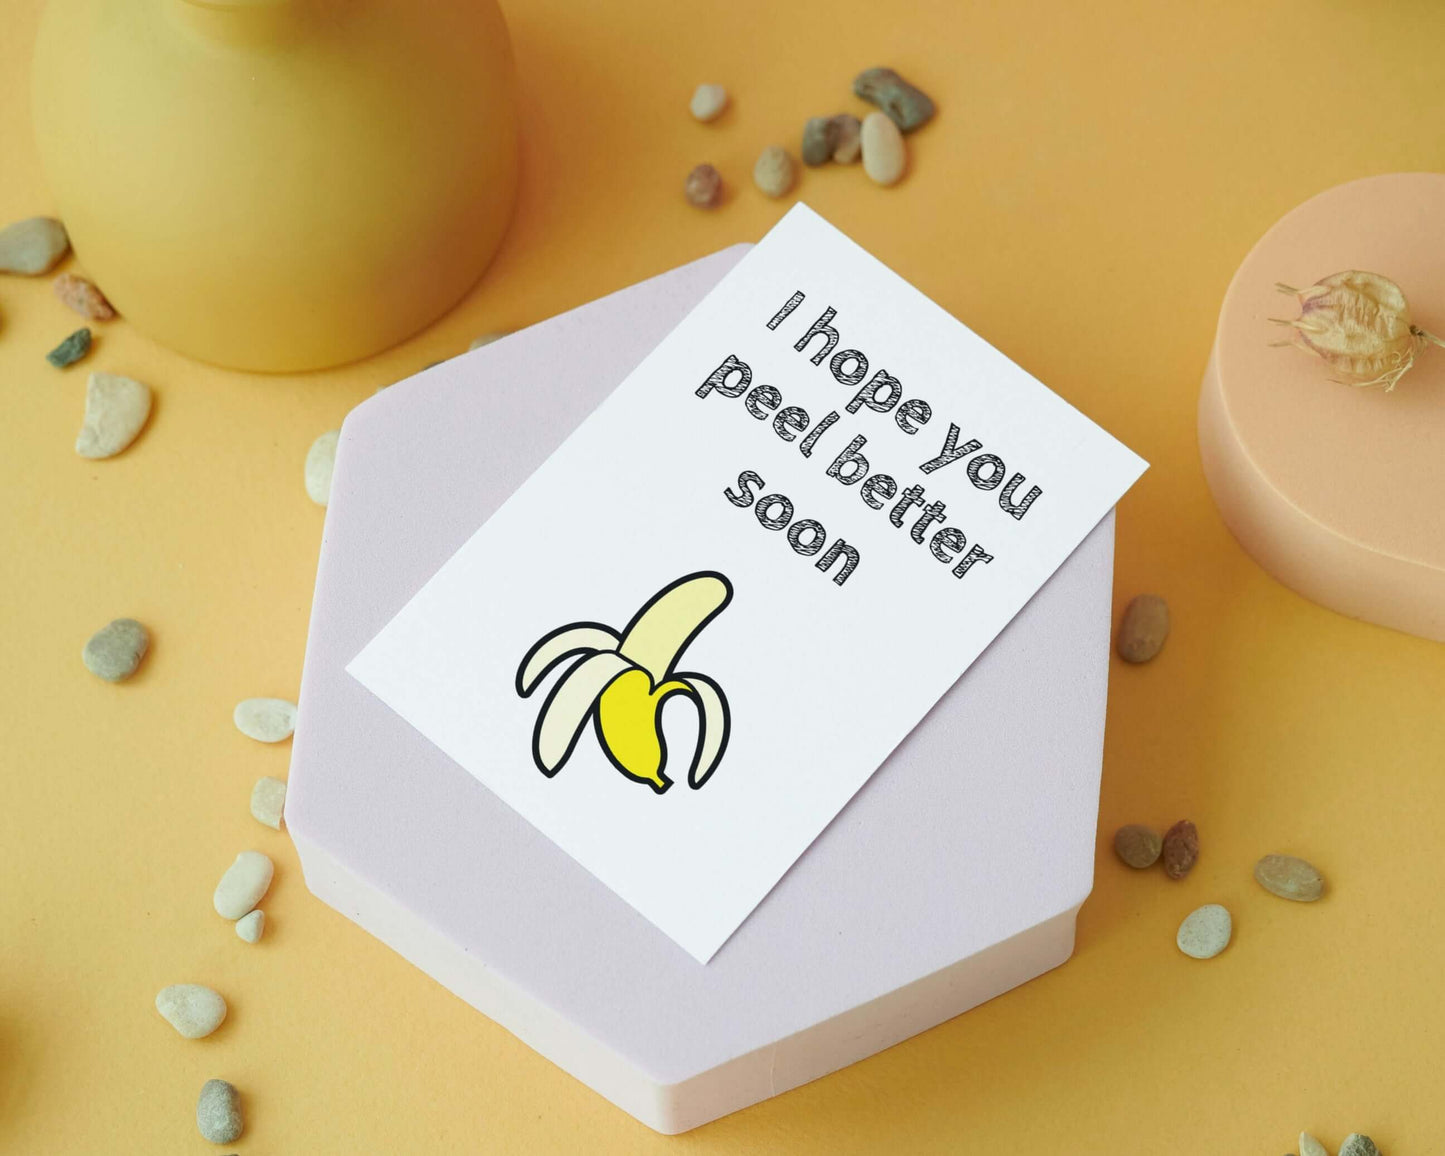 The Card Store UK's I Hope You Peel Better Soon | Funny Banana Pun Greeting Card | Get Well Soon Card, Get Well Soon Cards for £3.50 each